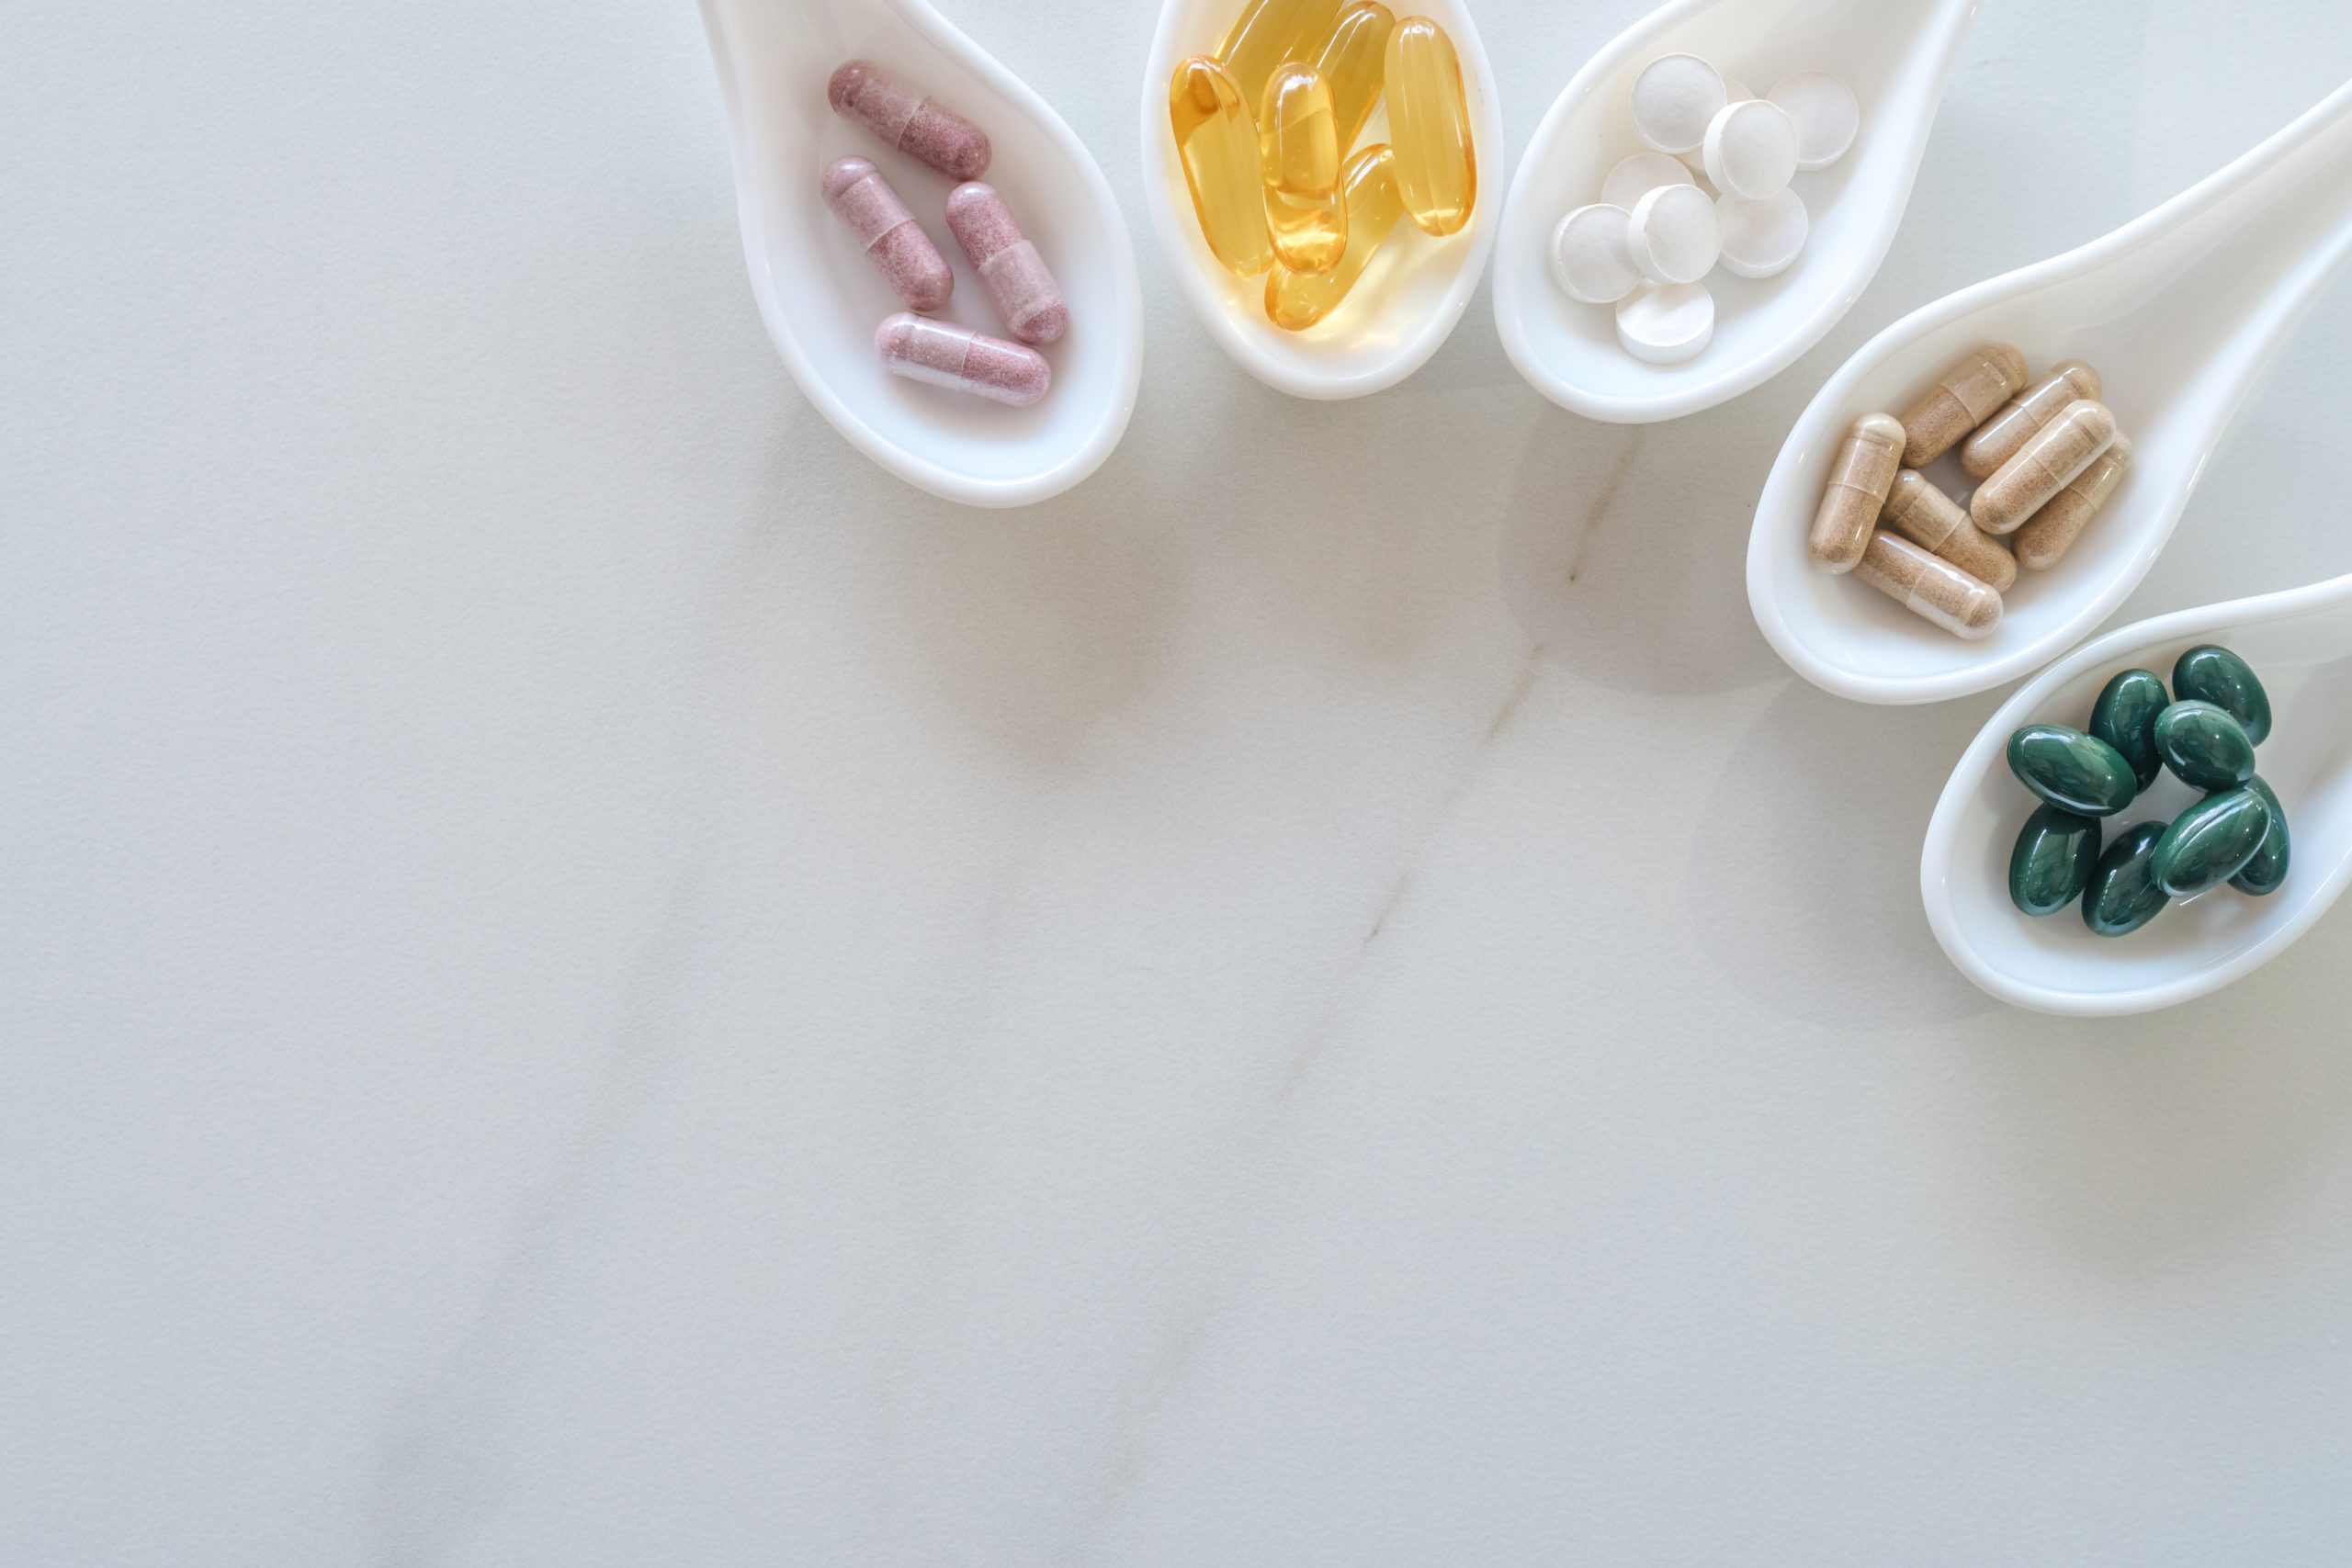 Three observations as dietary supplement industry trends emerge in 2021